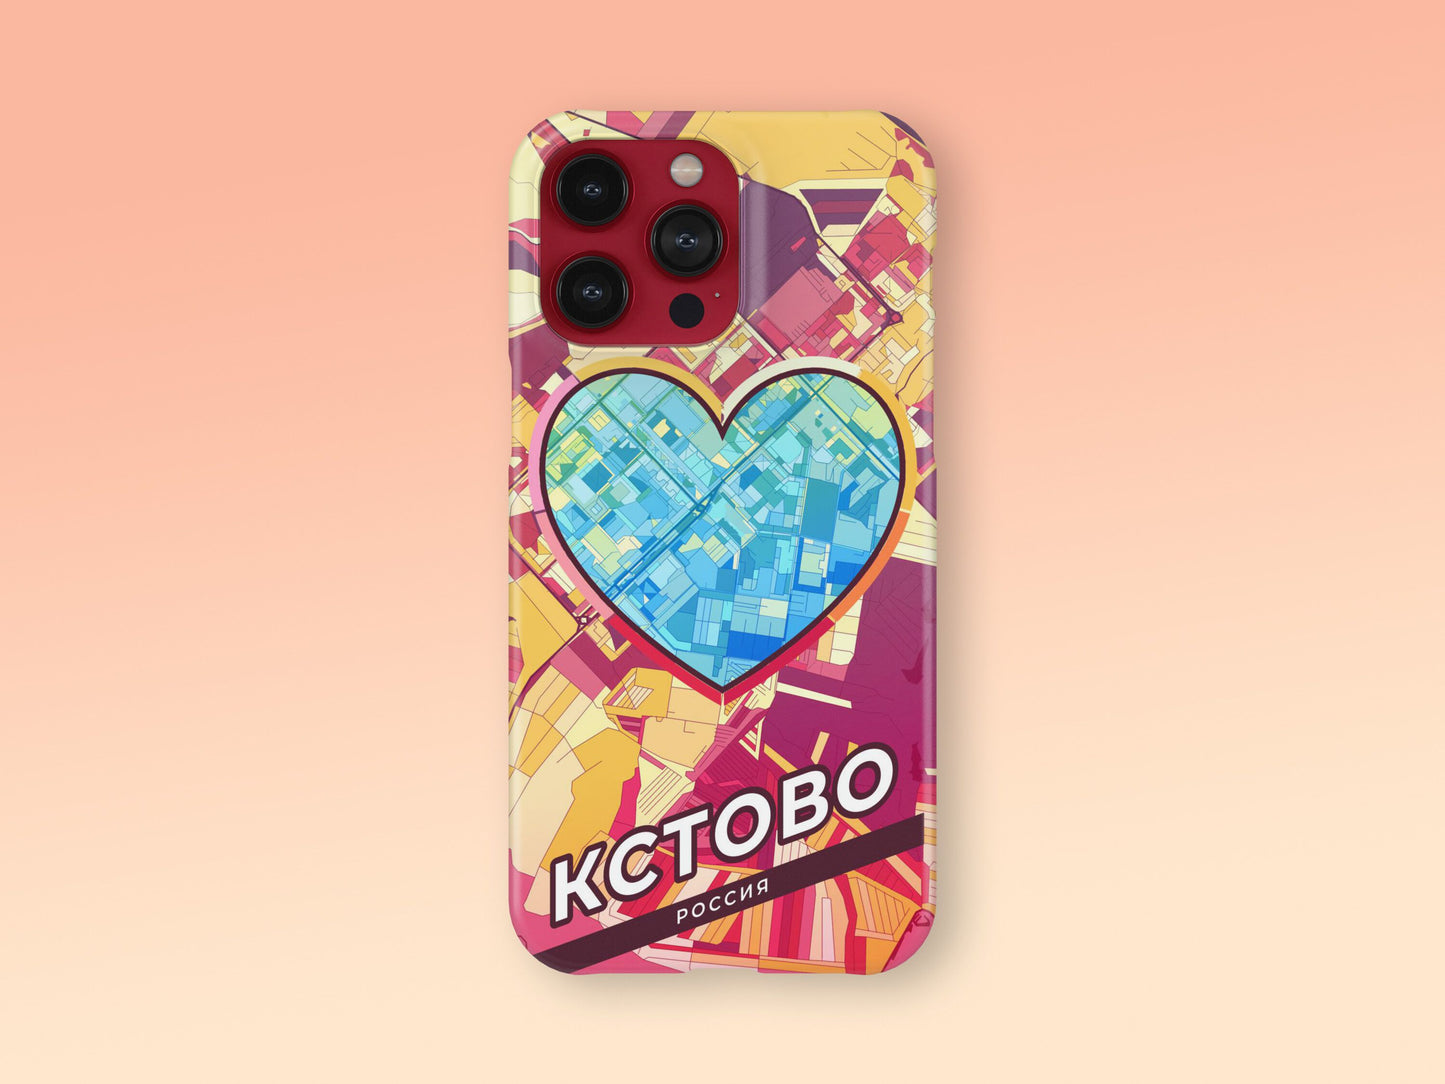 Kstovo Russia slim phone case with colorful icon. Birthday, wedding or housewarming gift. Couple match cases. 2